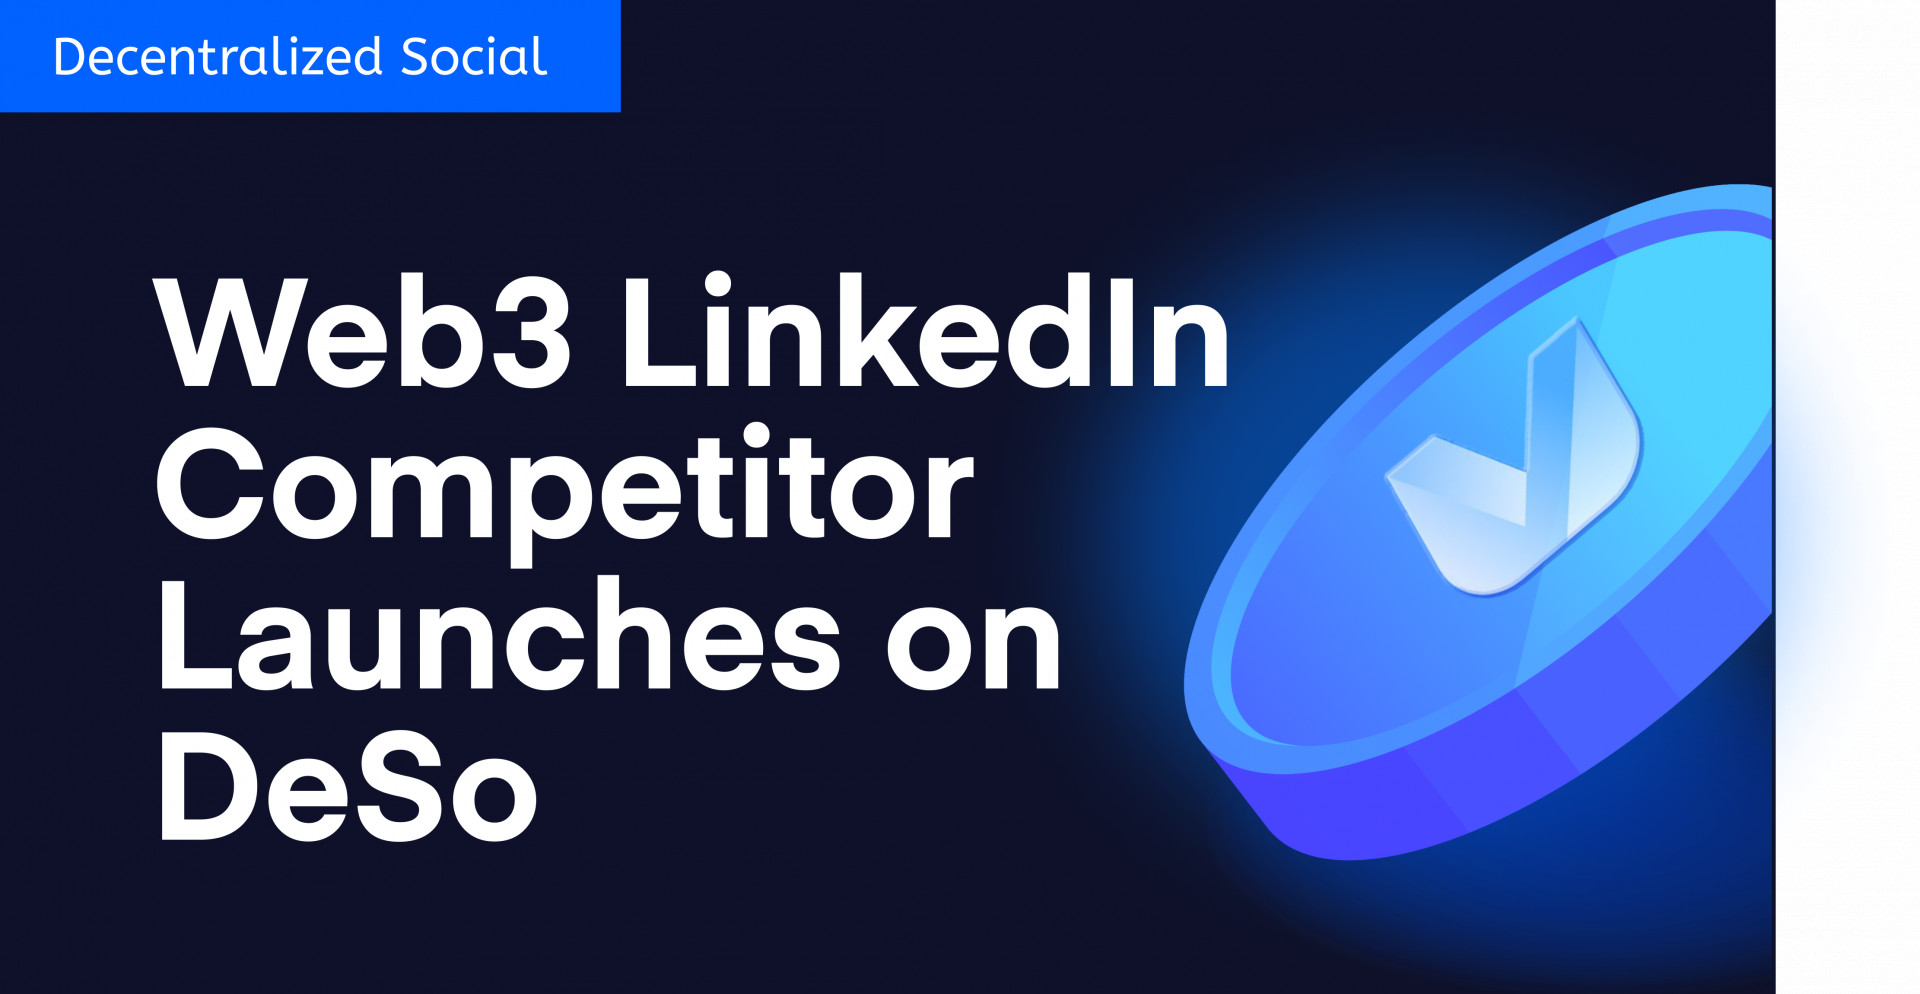 , Decentralized Web3 LinkedIn Competitor Launches on DeSo